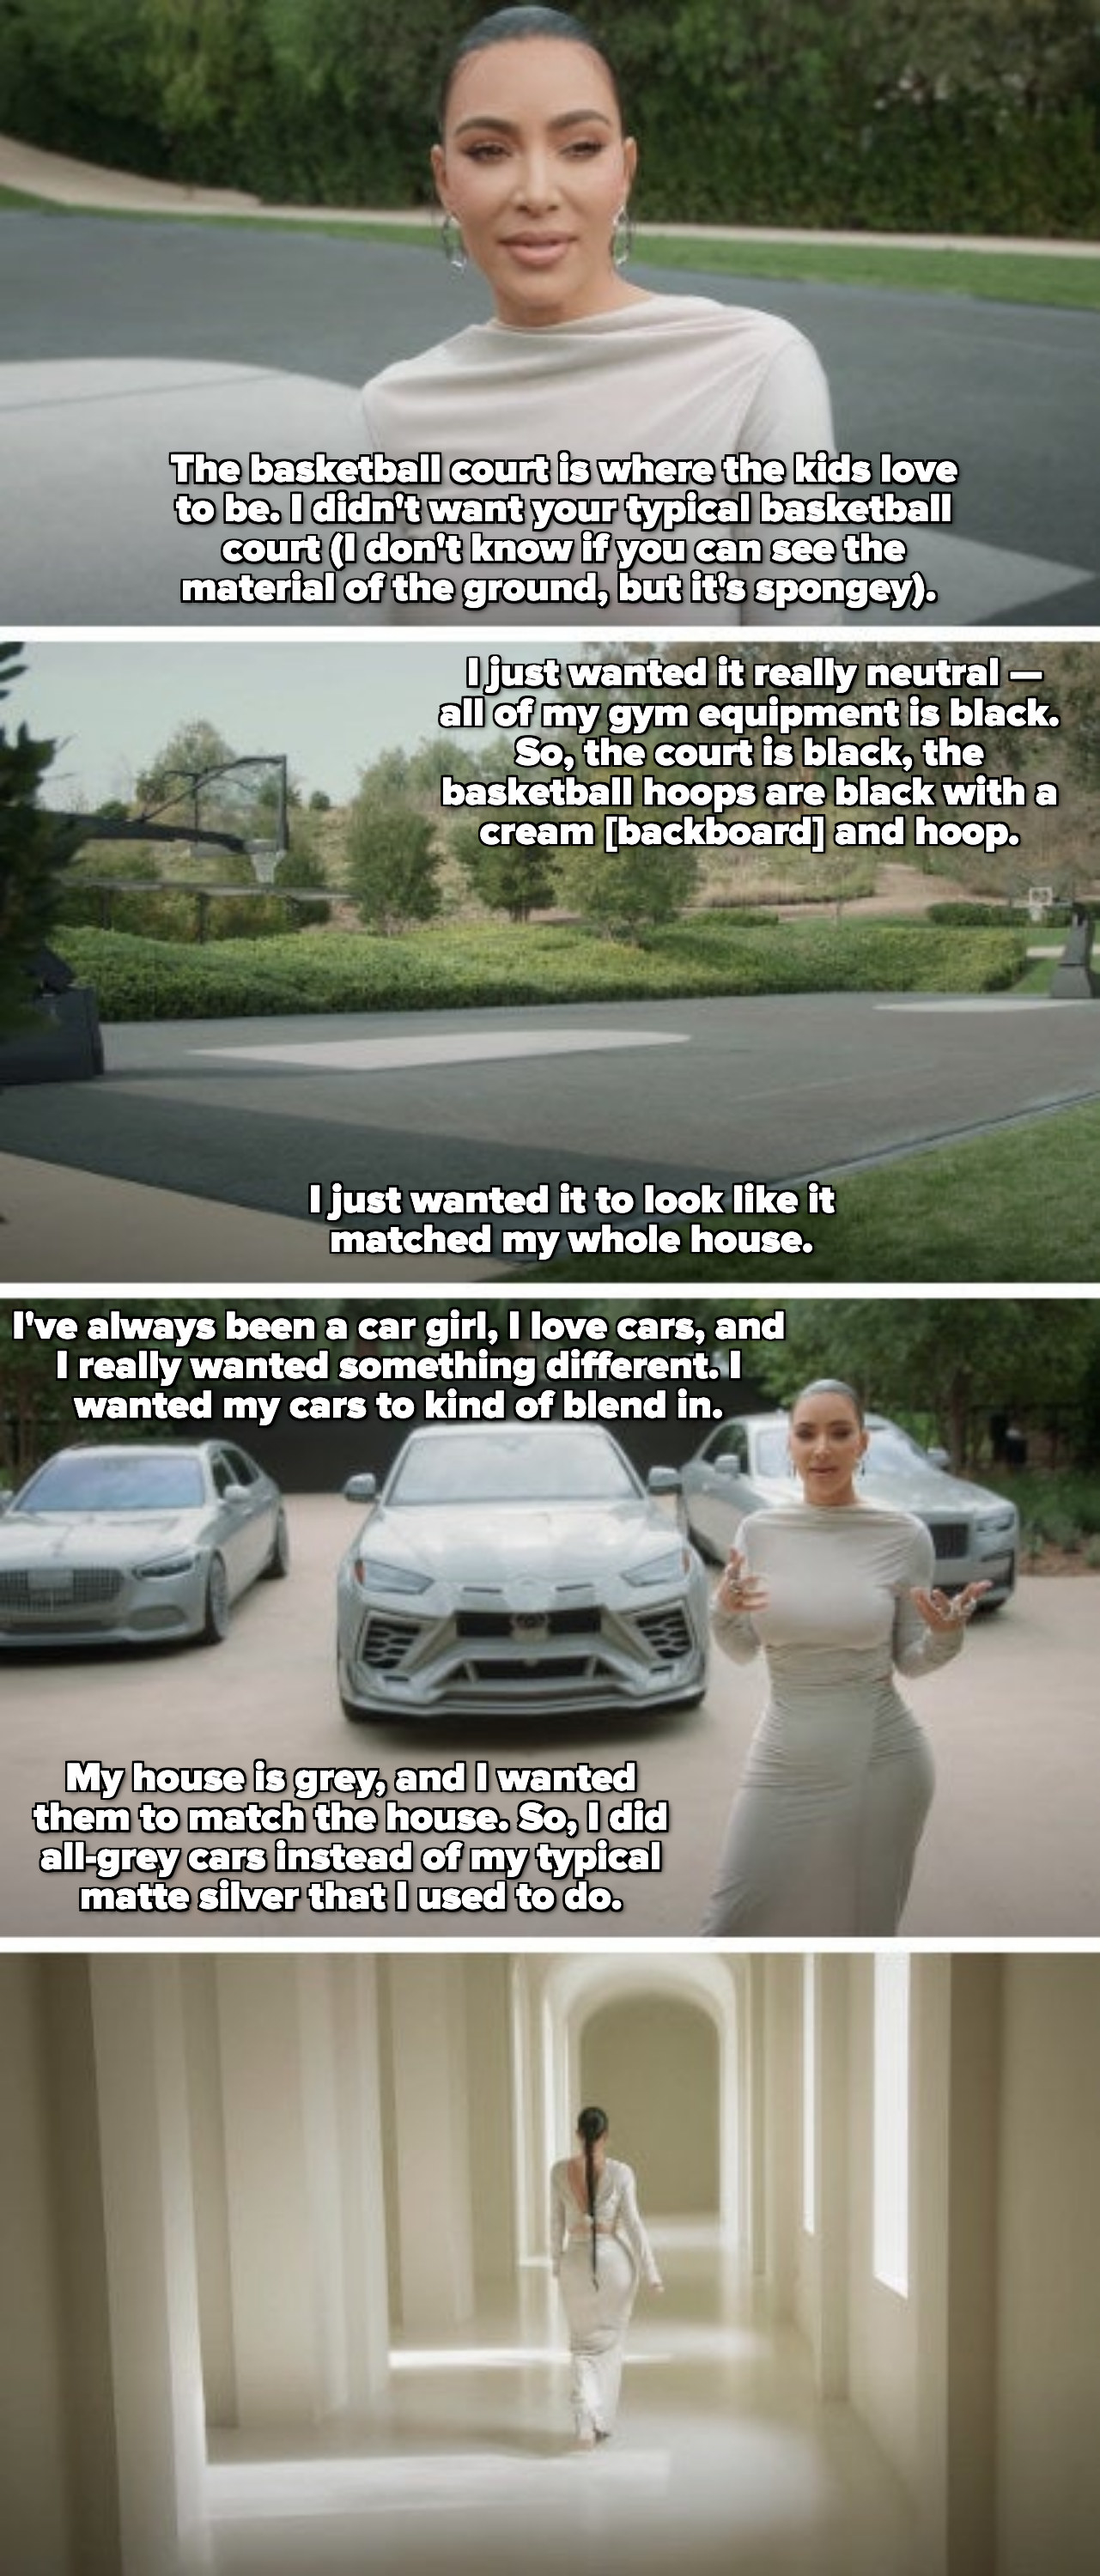 Kardashian explaining she picked a gray basketball court and gray cars so they&#x27;d match her house